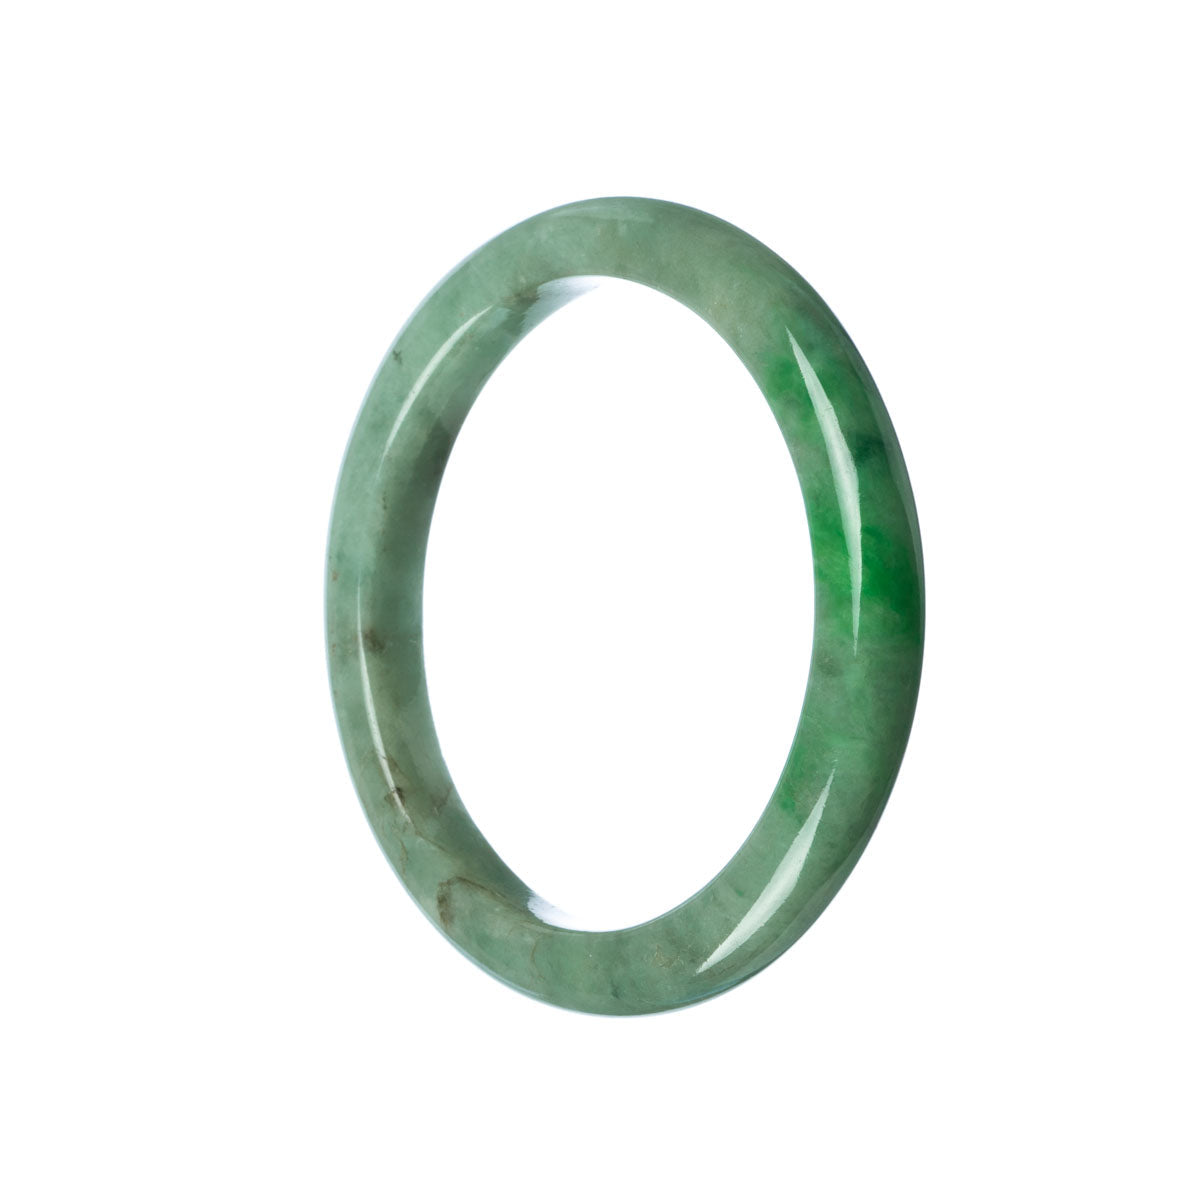 A close-up photo of a beautiful green jade bracelet with a semi-round shape, measuring 58mm in diameter. The bracelet has a traditional design and is made of genuine, natural jade. It is a stunning piece of jewelry.